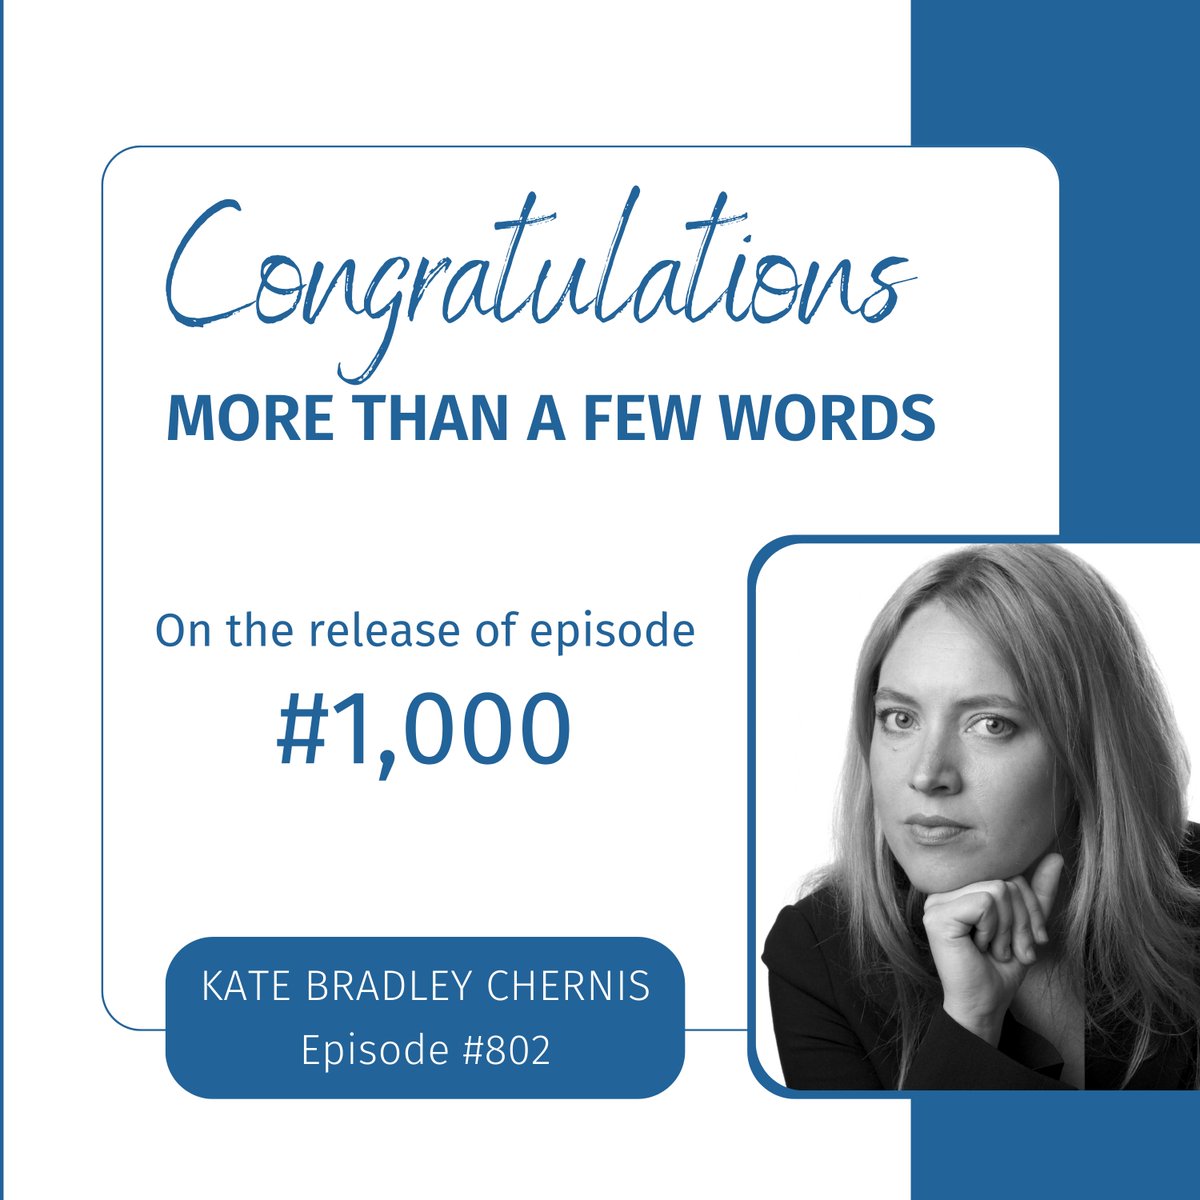 Comma club, baby! @MTFWpodcast has officially hit 1,000 episodes. And any podcaster knows that is NO easy feat. AAAAND did we mention they're all STELLAR? Give ours a listen to see for yourself: bit.ly/4a4DiOa @lorraineball #AI